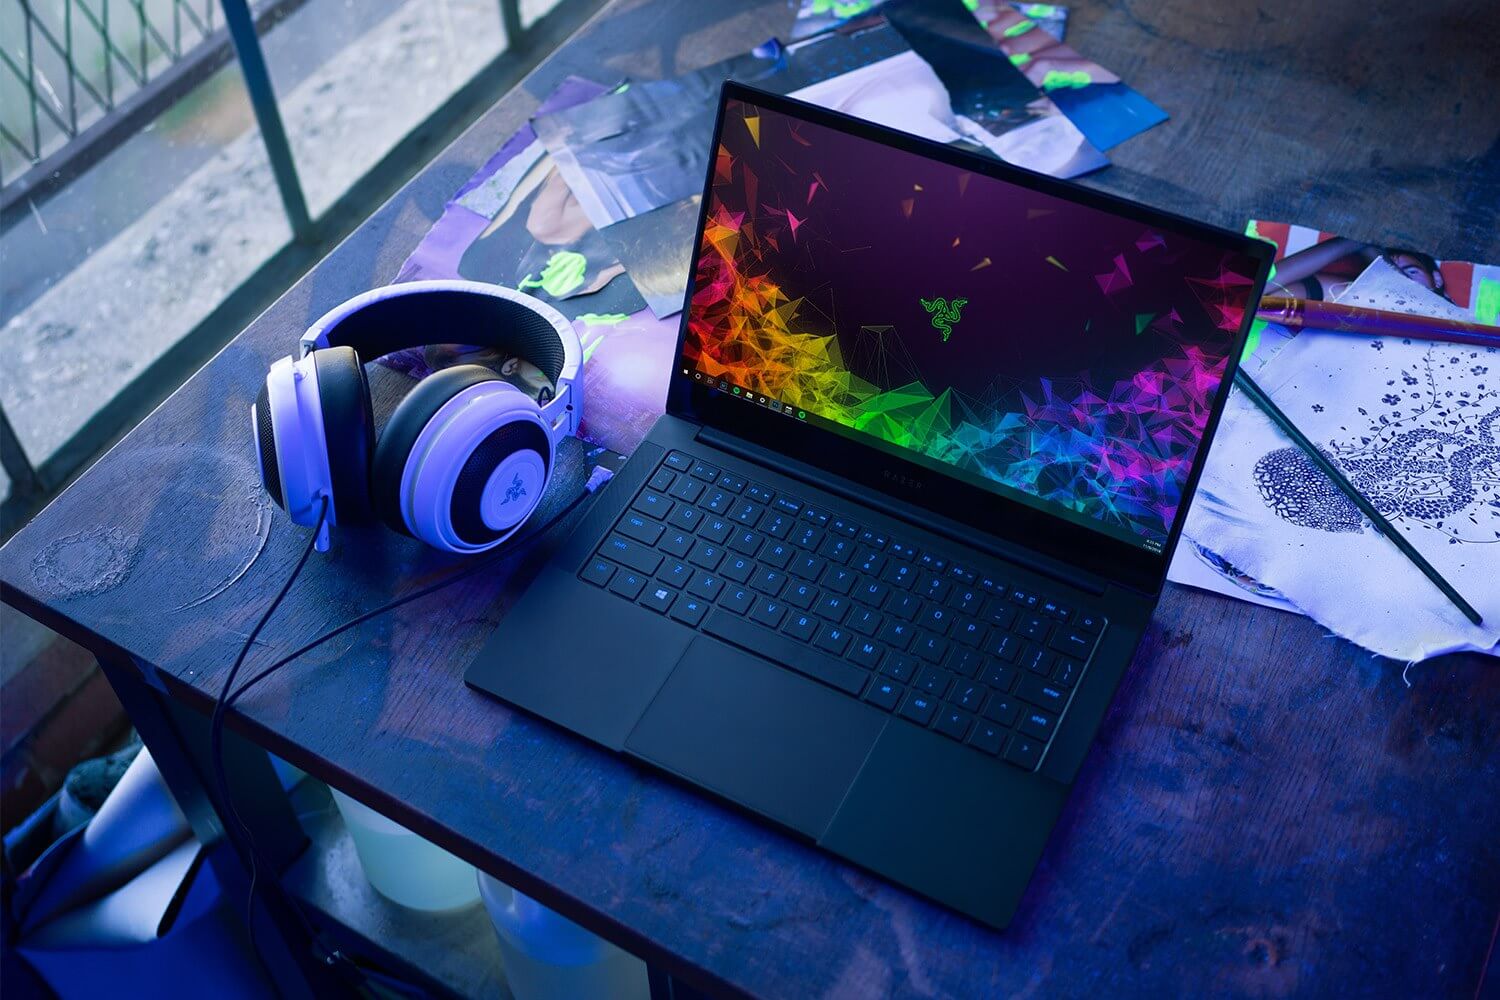 Razer revamps its 13-inch Blade Stealth ultrabook with a new look and upgraded hardware